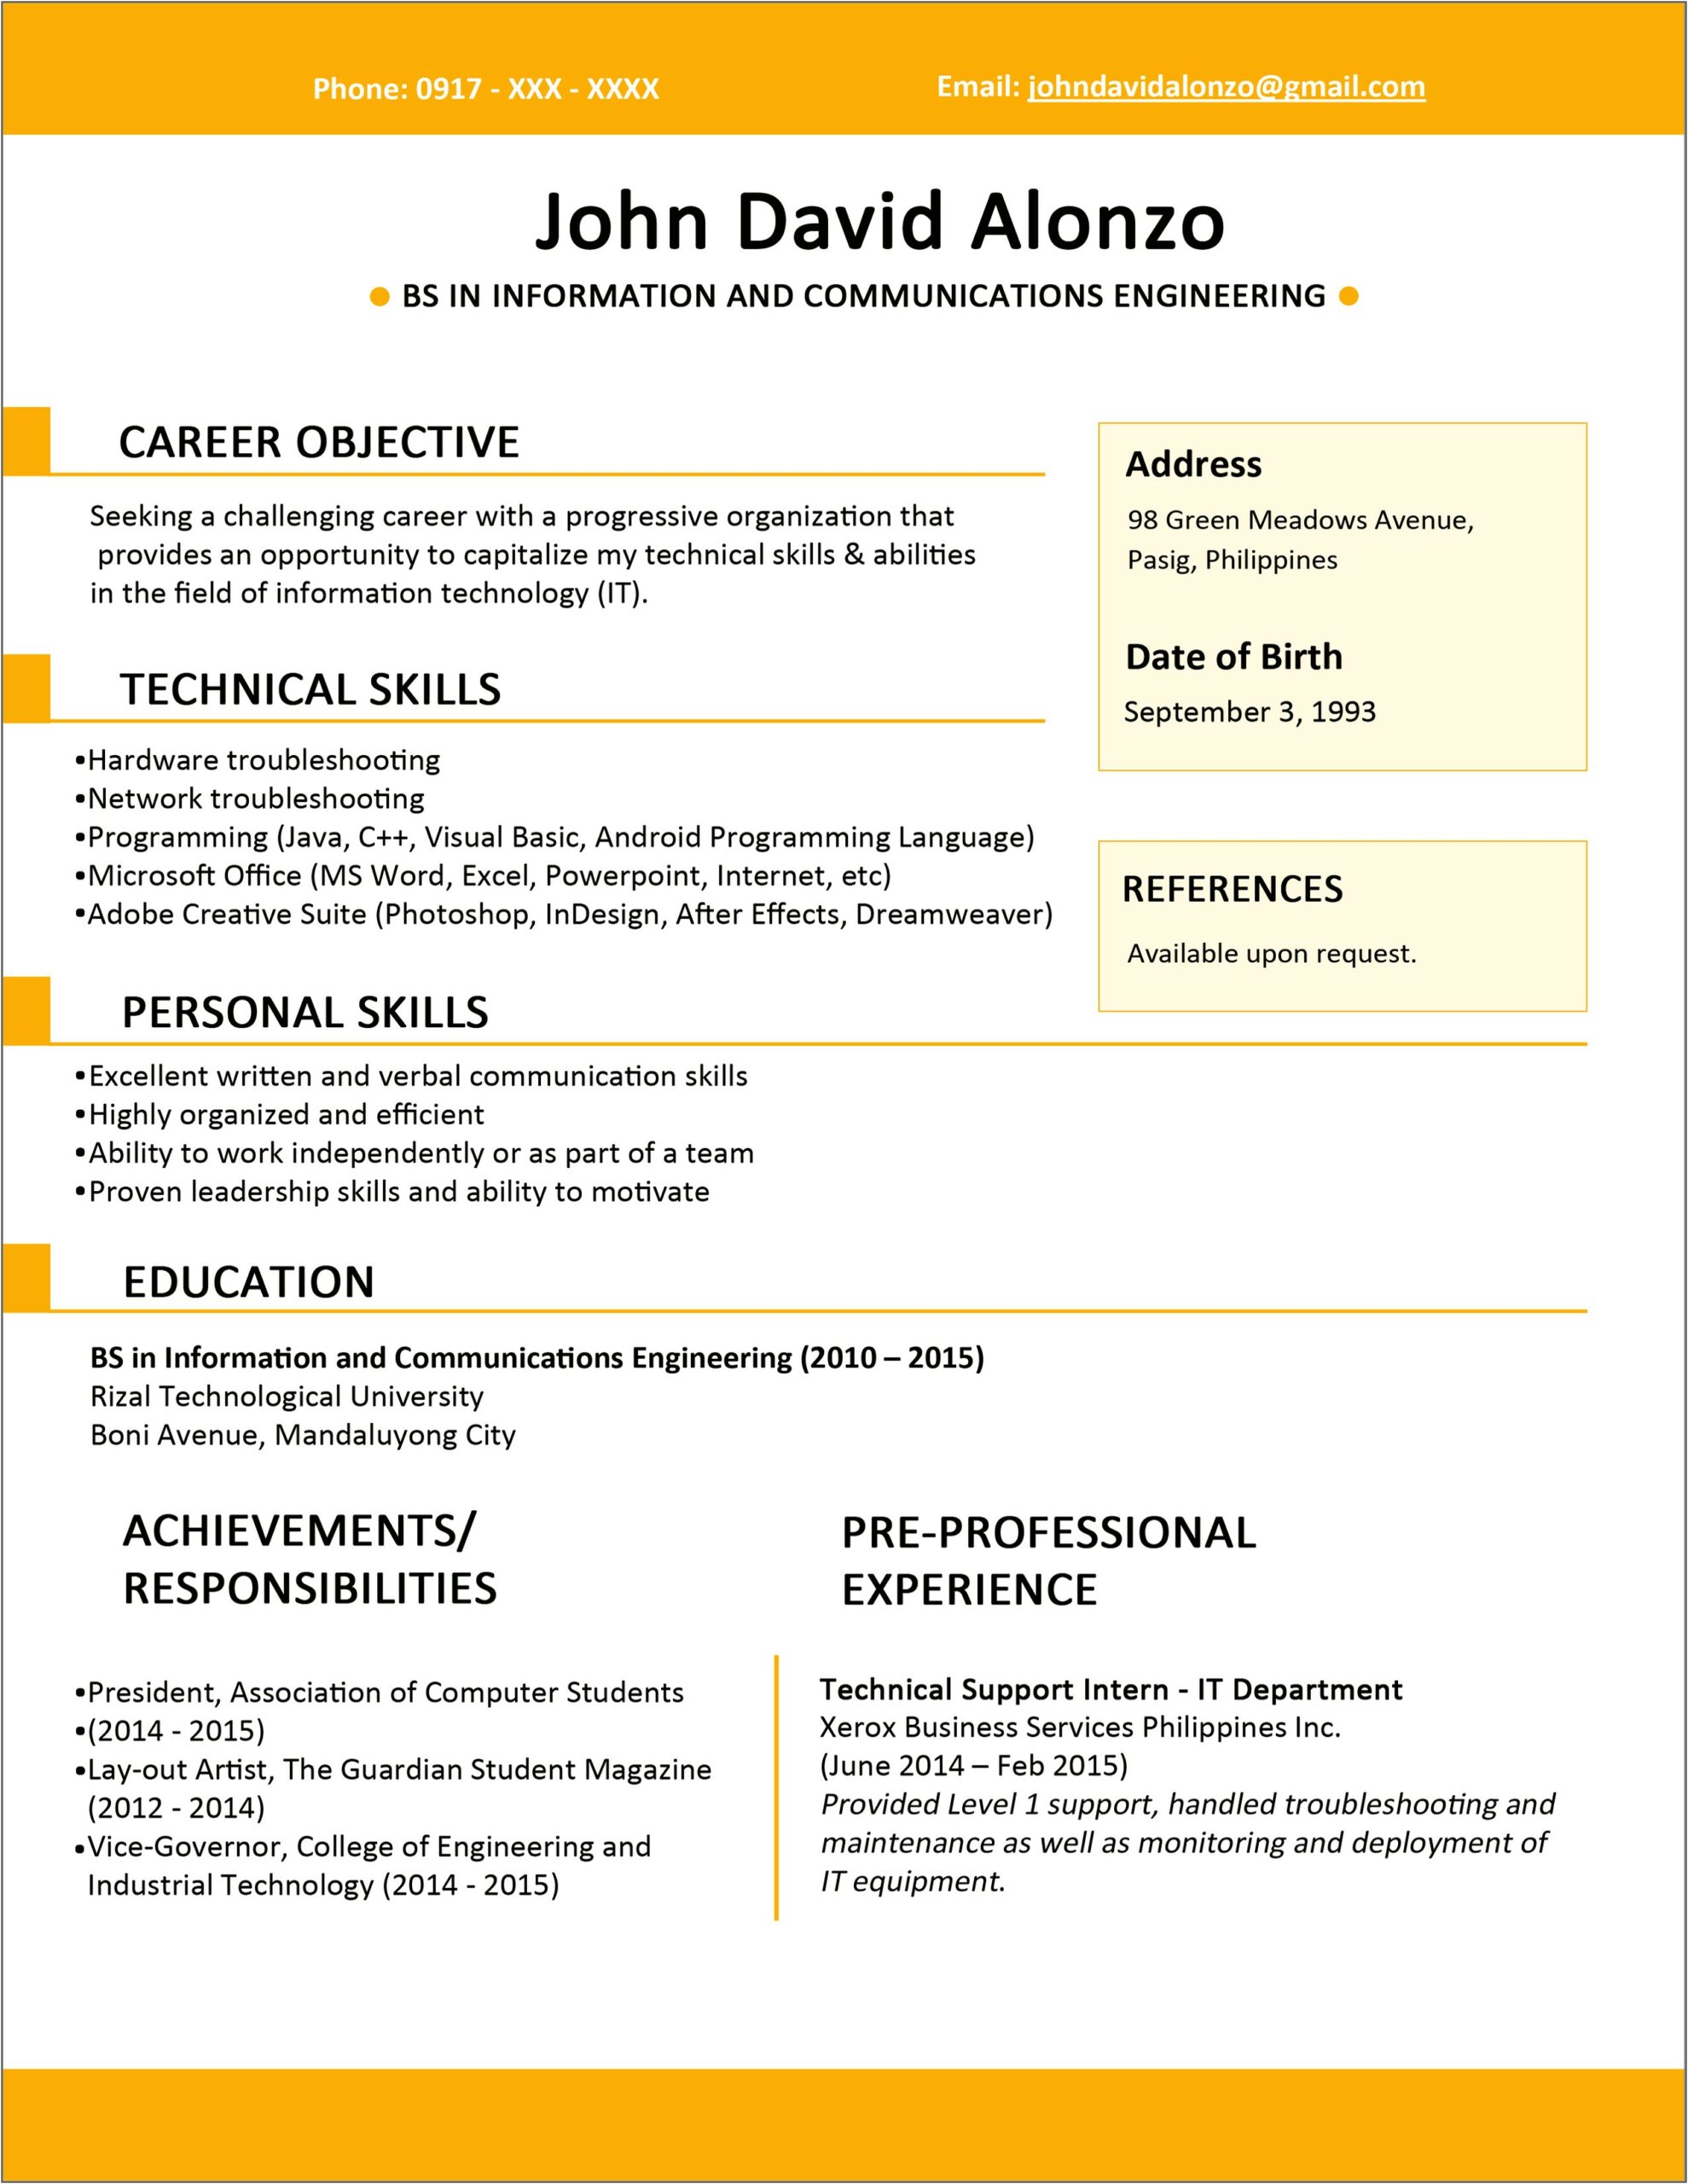 The Best Resume Format For Experienced Engineers